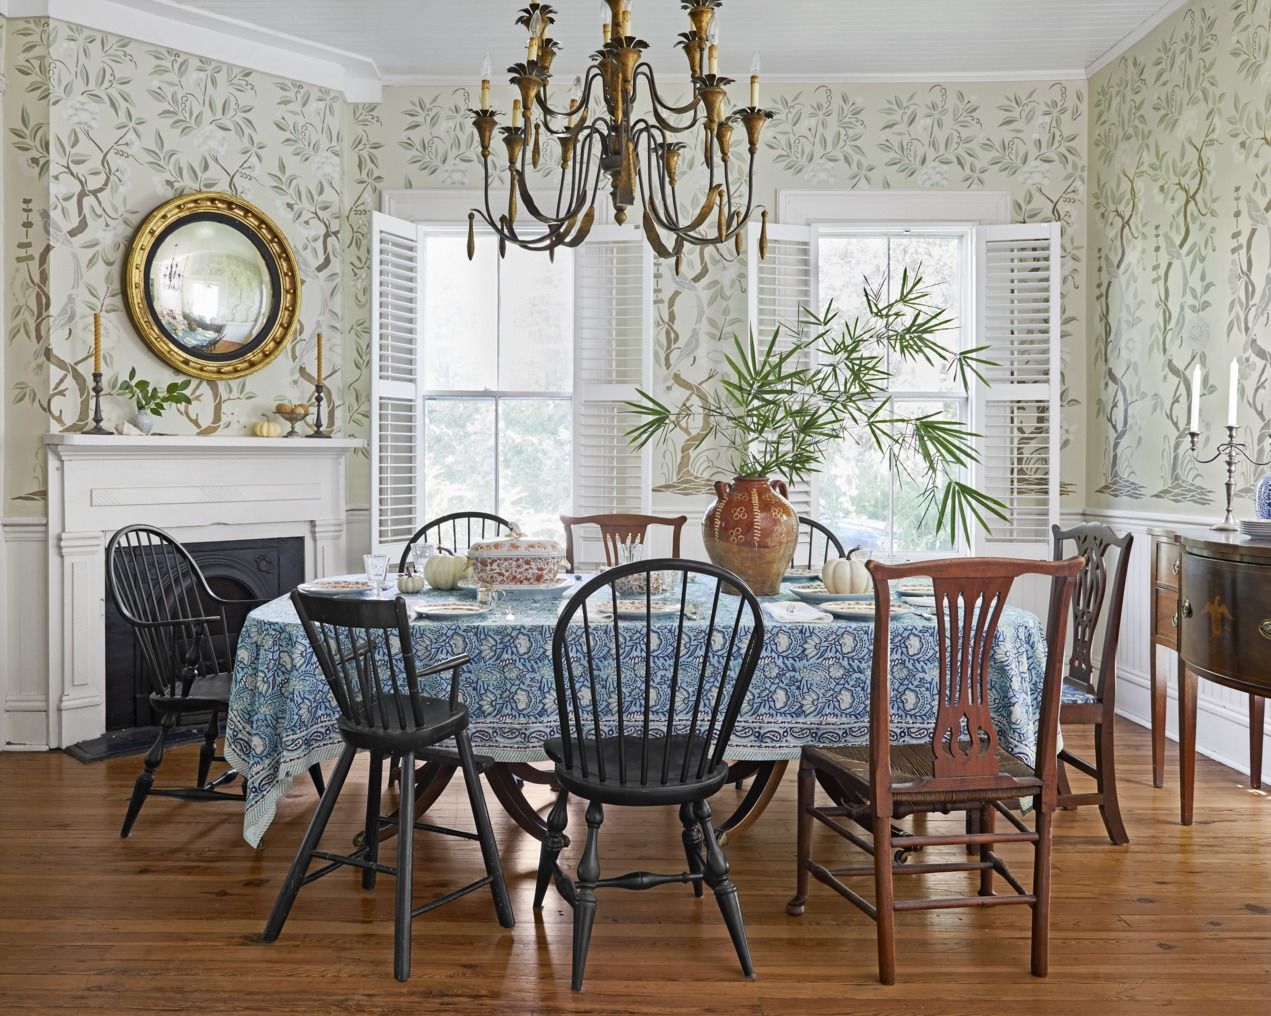 What are some suggestions for dining room designs? - Quora